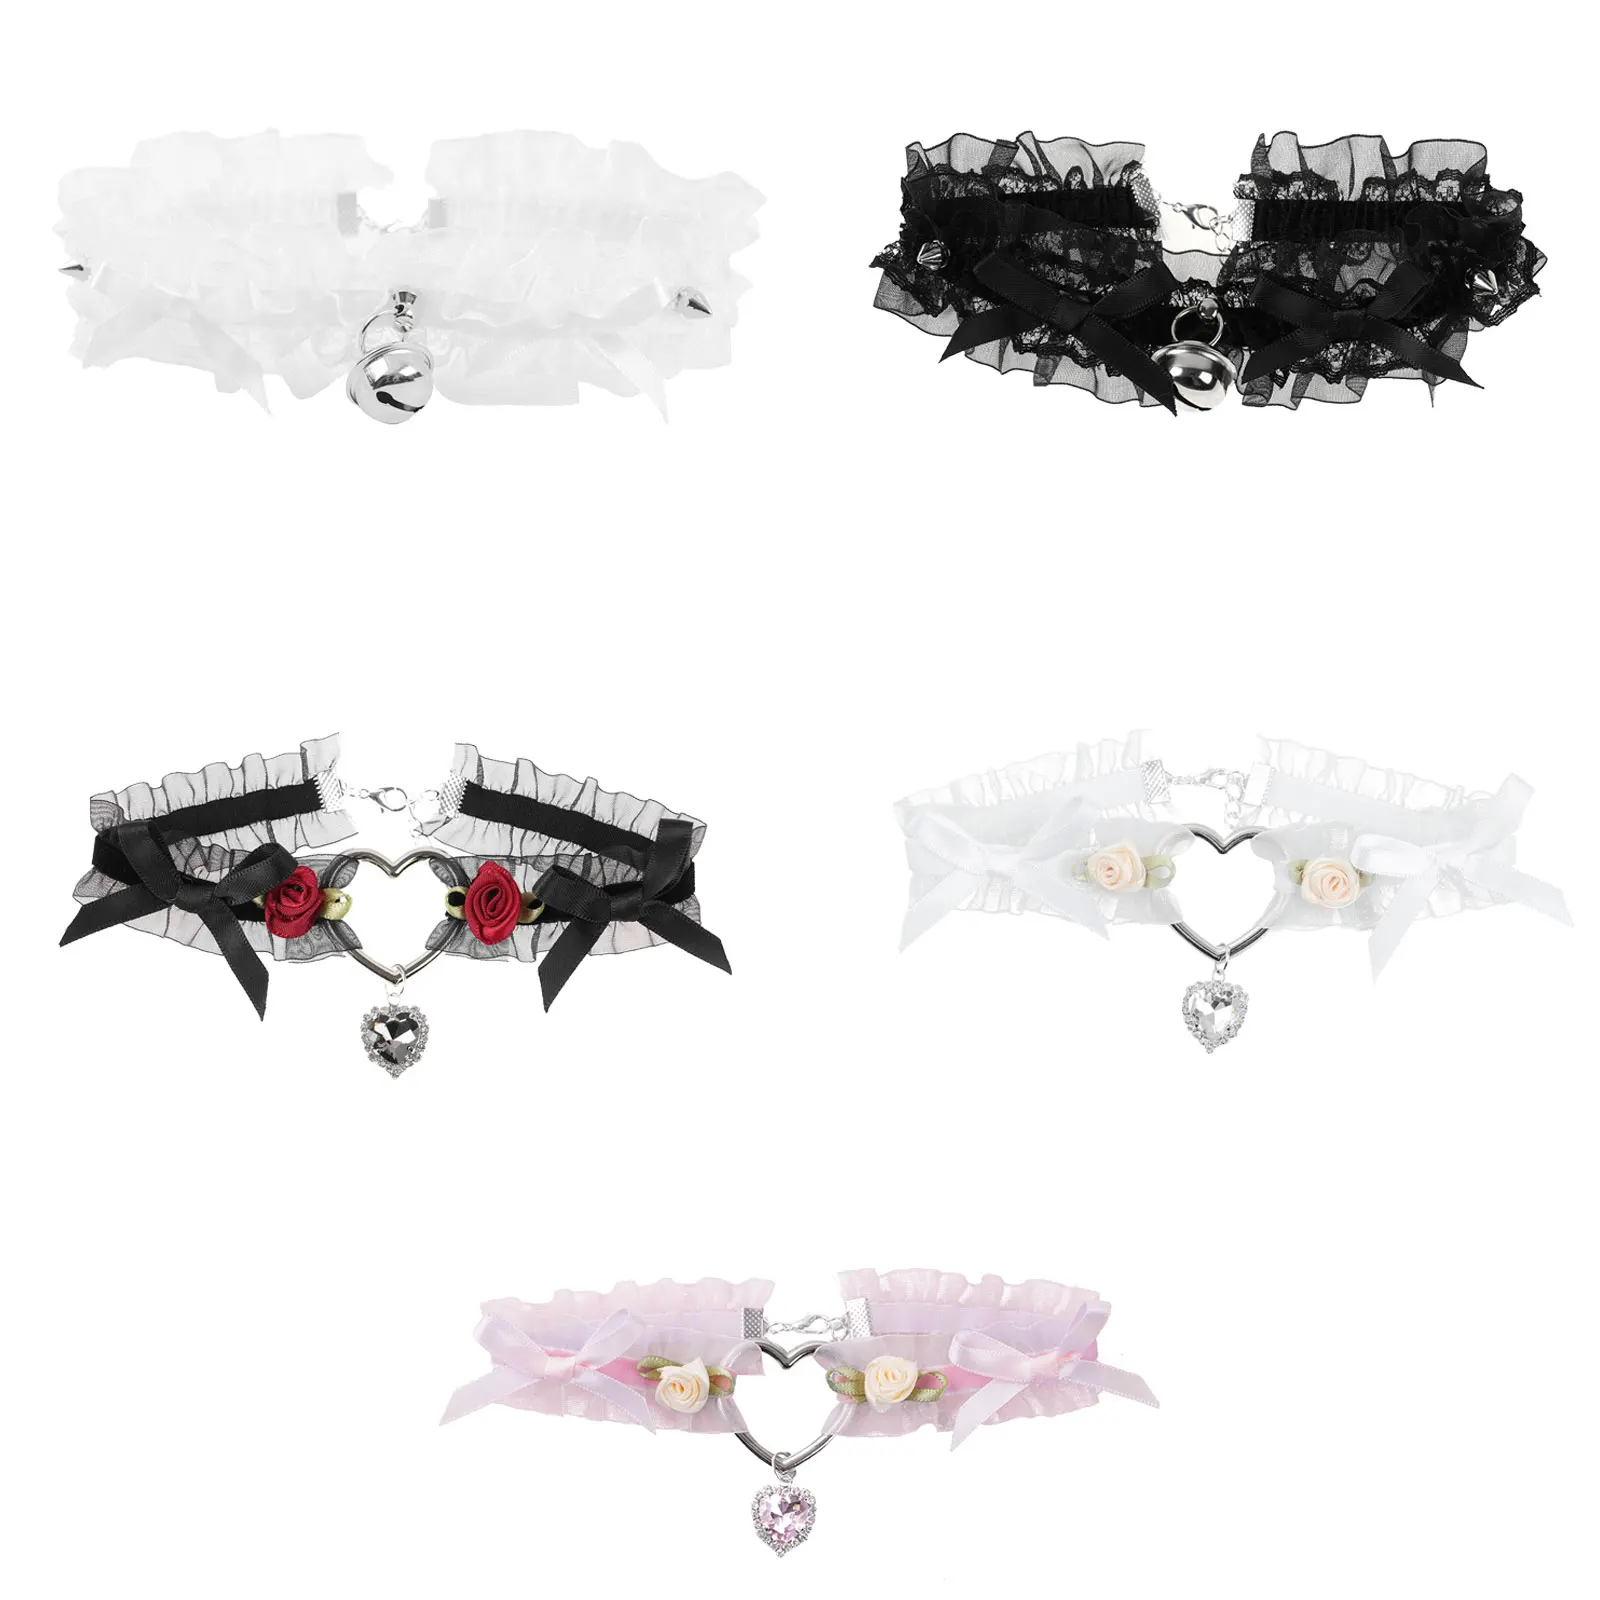 Women's Cute Collar Lolitas Handmade Vintage Lace Heart Choker for Women Gothic Statement Bow Knot Bell Necklace Accessories